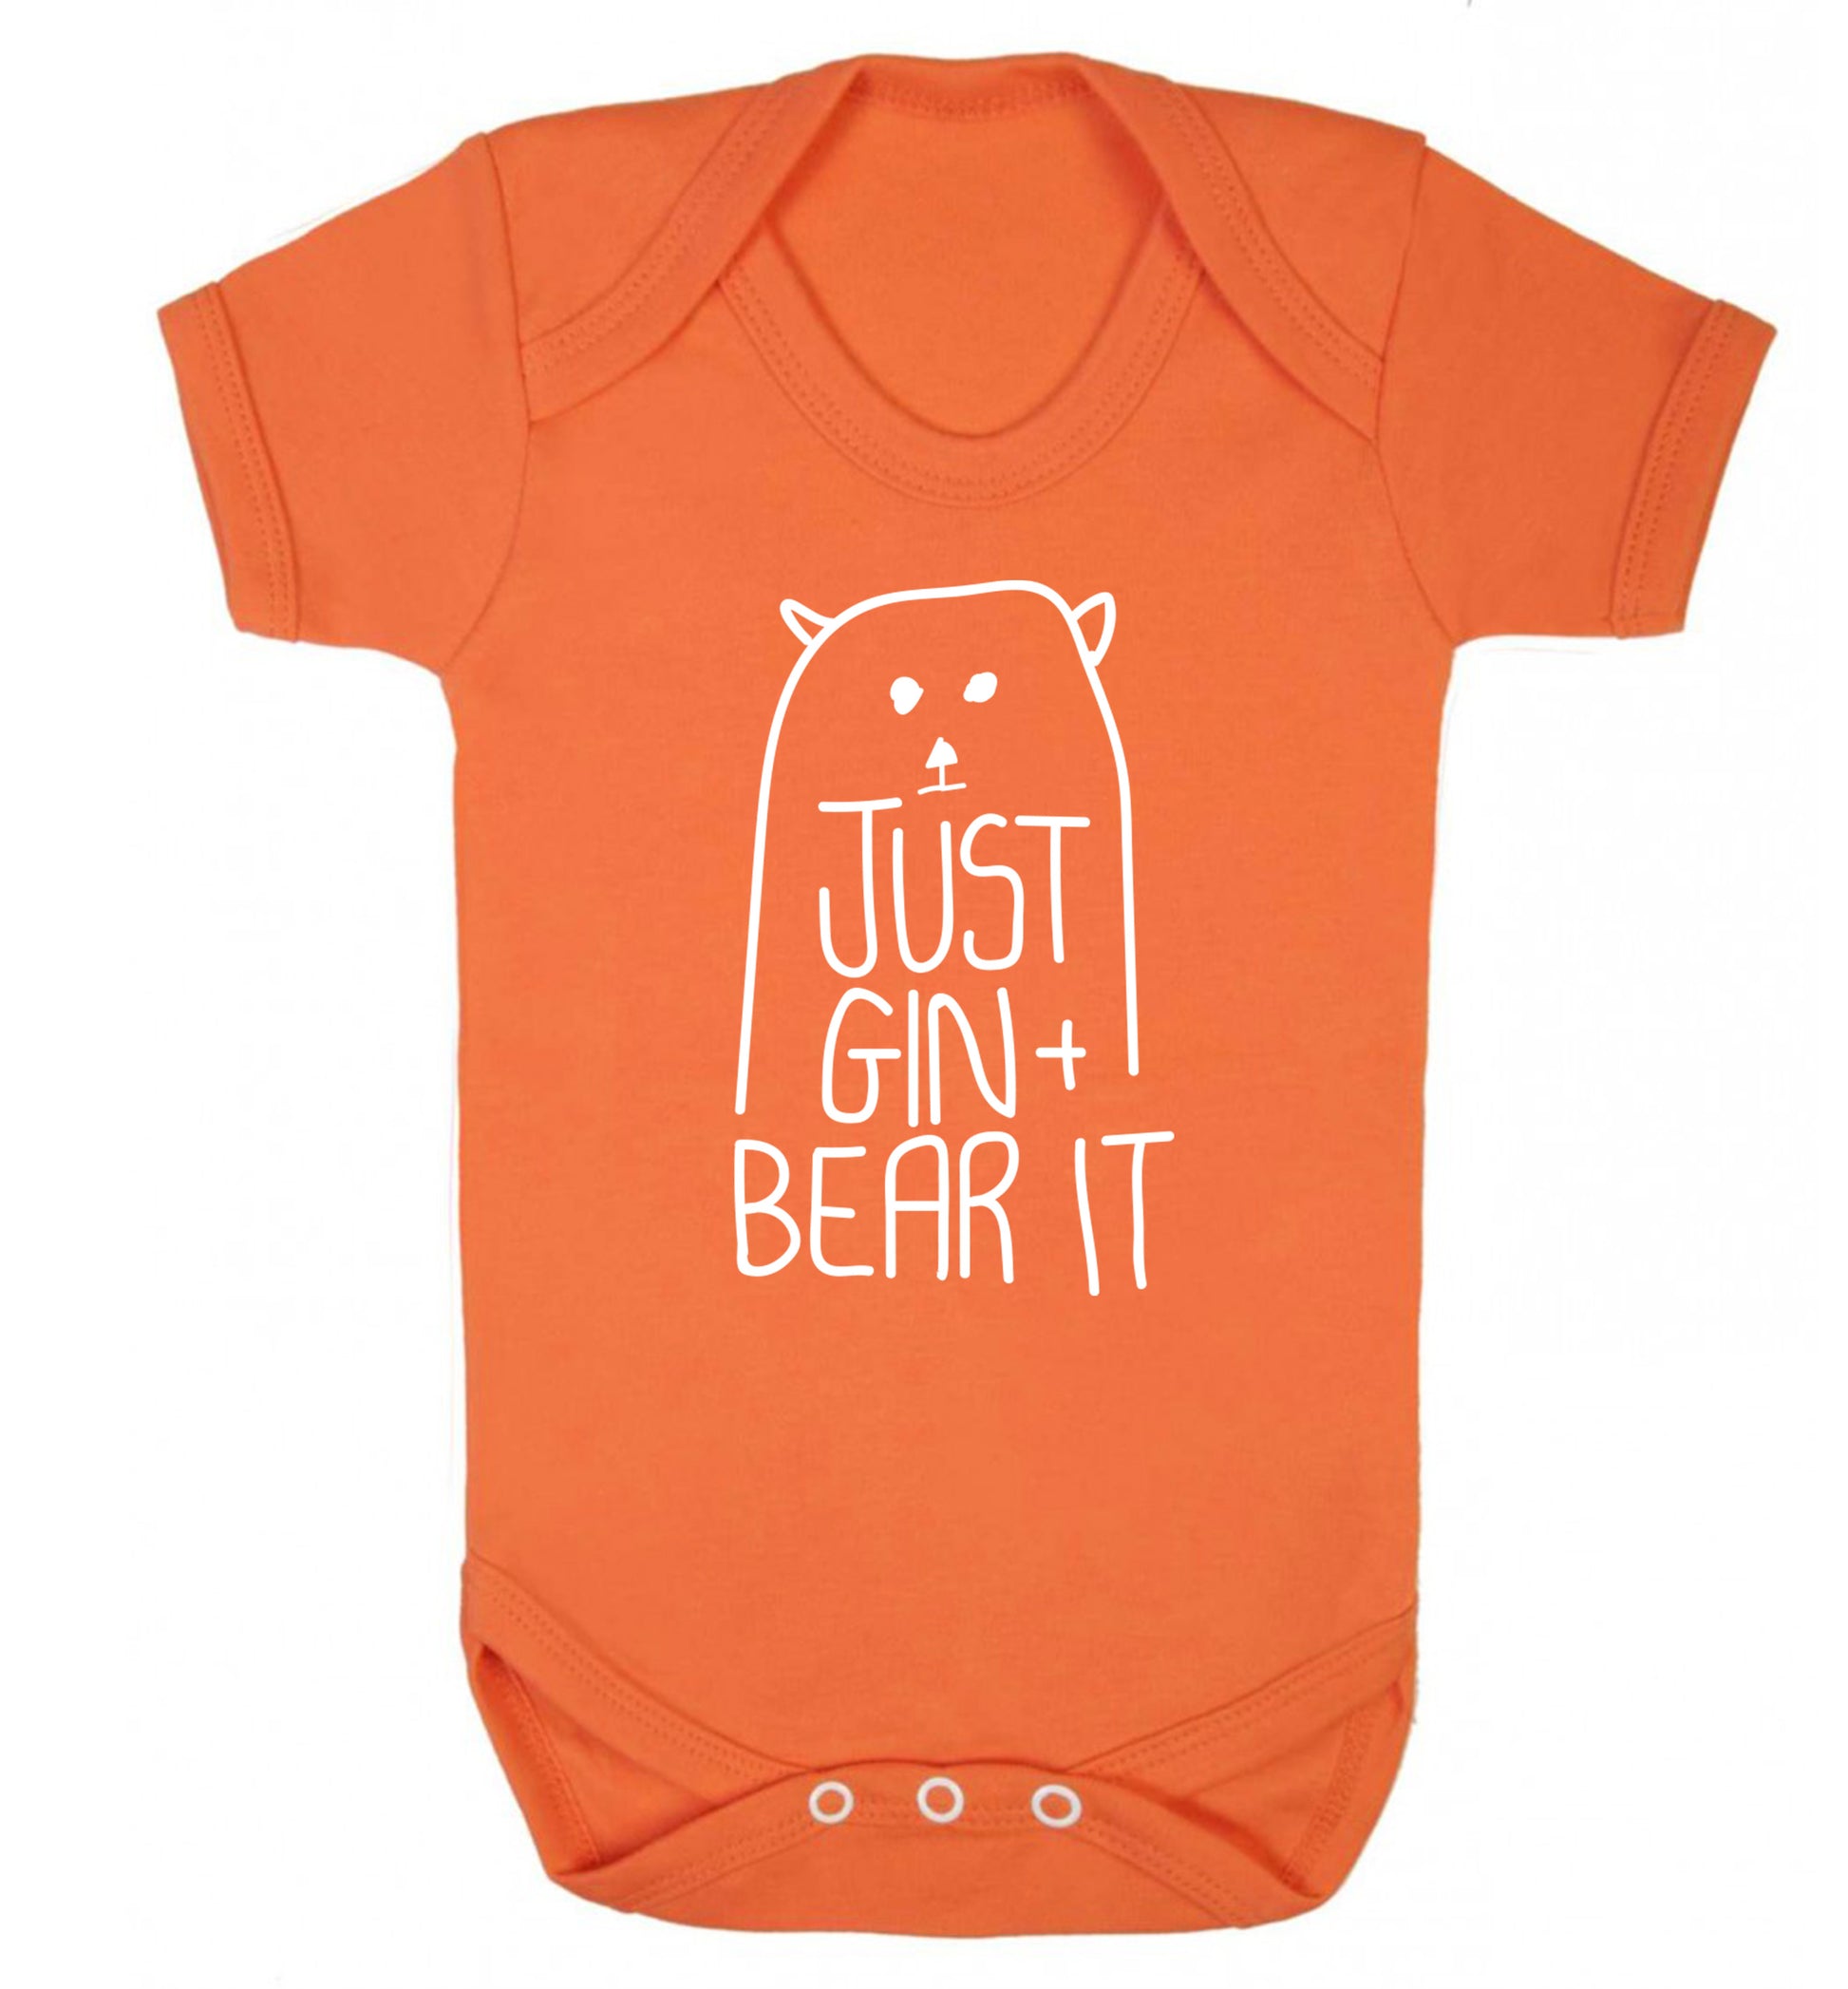 Just gin and bear it Baby Vest orange 18-24 months